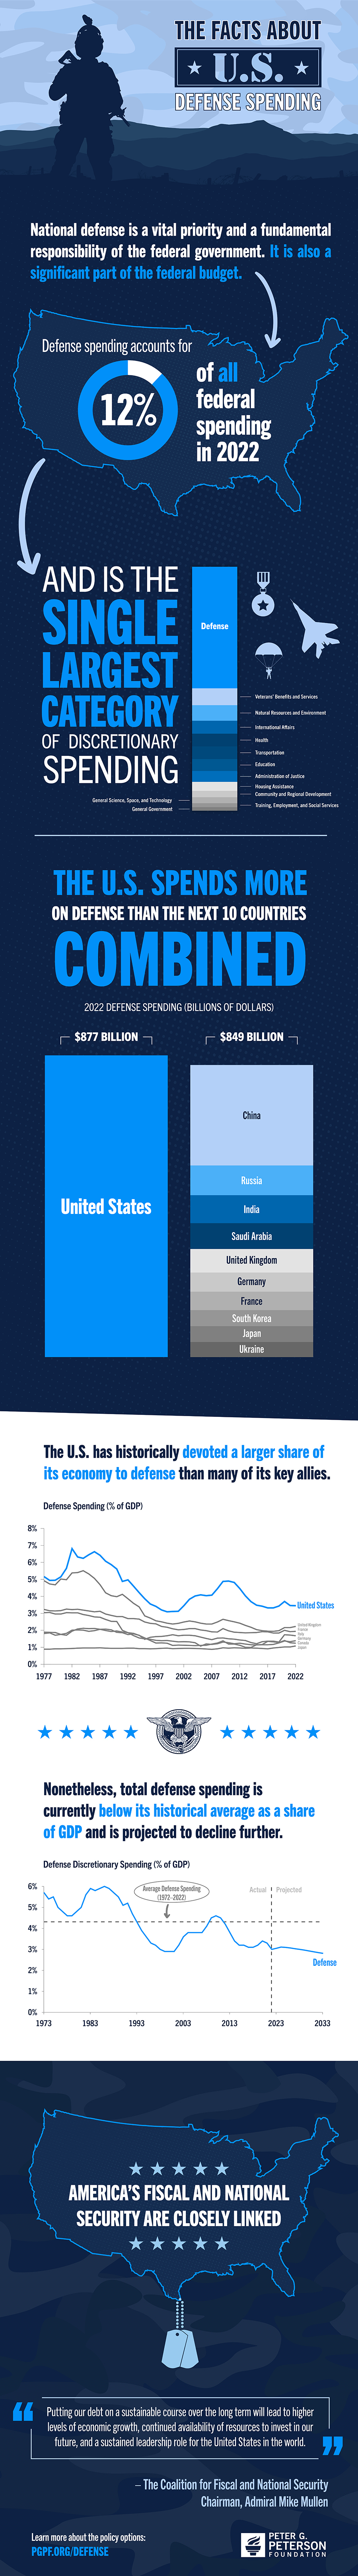 Infographic-The-Facts-About-US-Defense-Spending.jpg